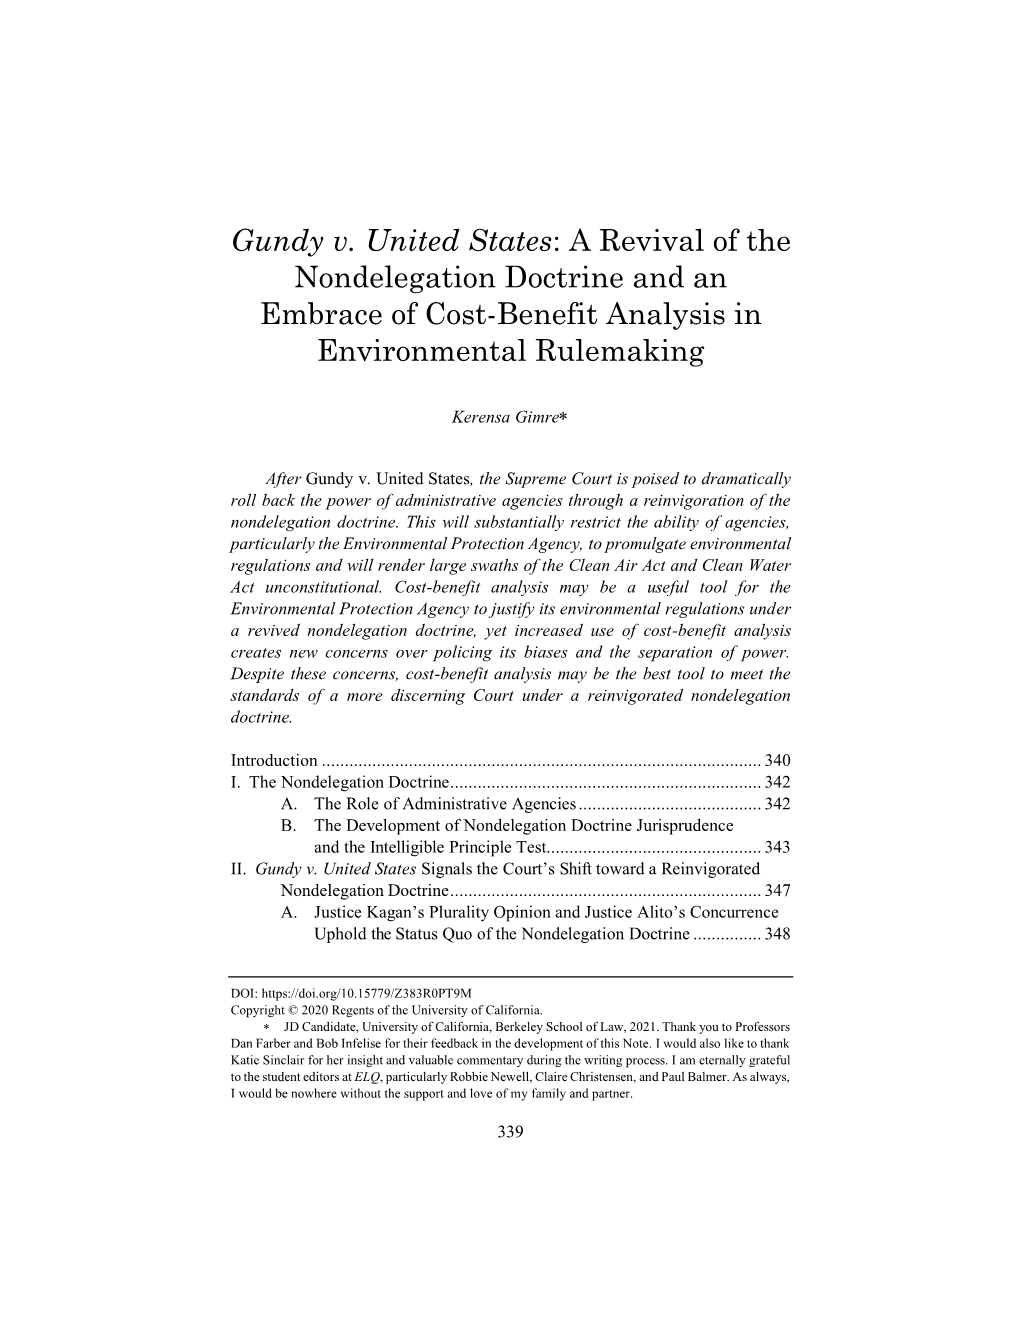 A Revival of the Nondelegation Doctrine and an Embrace of Cost-Benefit Analysis in Environmental Rulemaking